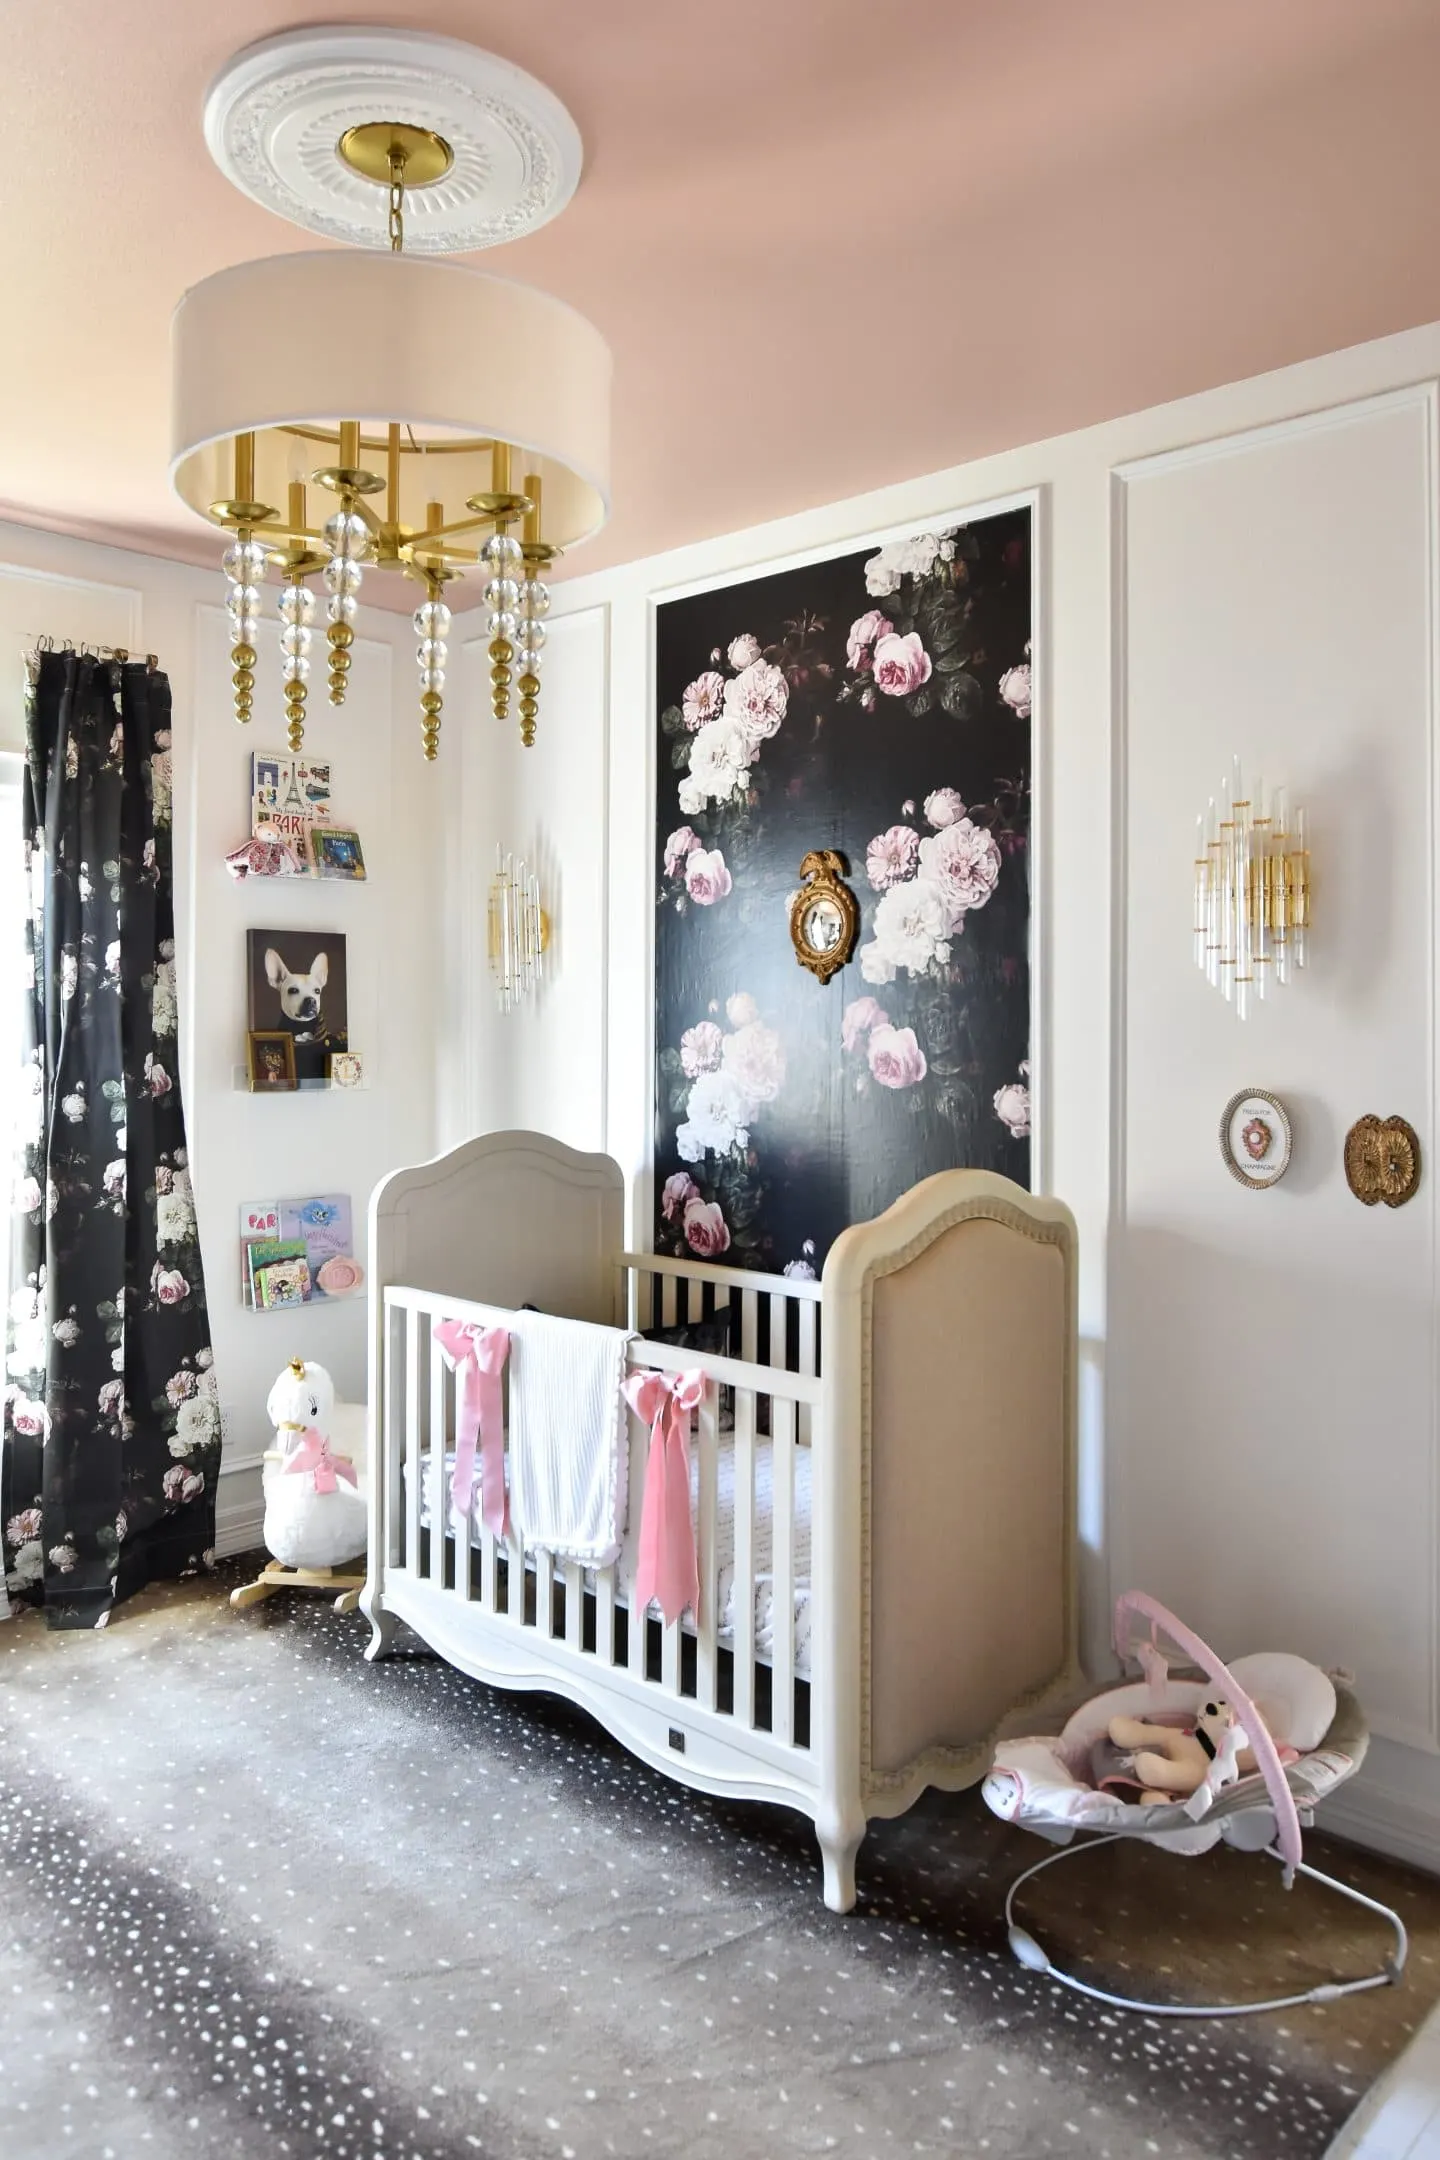 A modern French baby girl nursery with moody florals, antique and thrifted furniture and decor plus lots of budget-friendly DIY ideas.